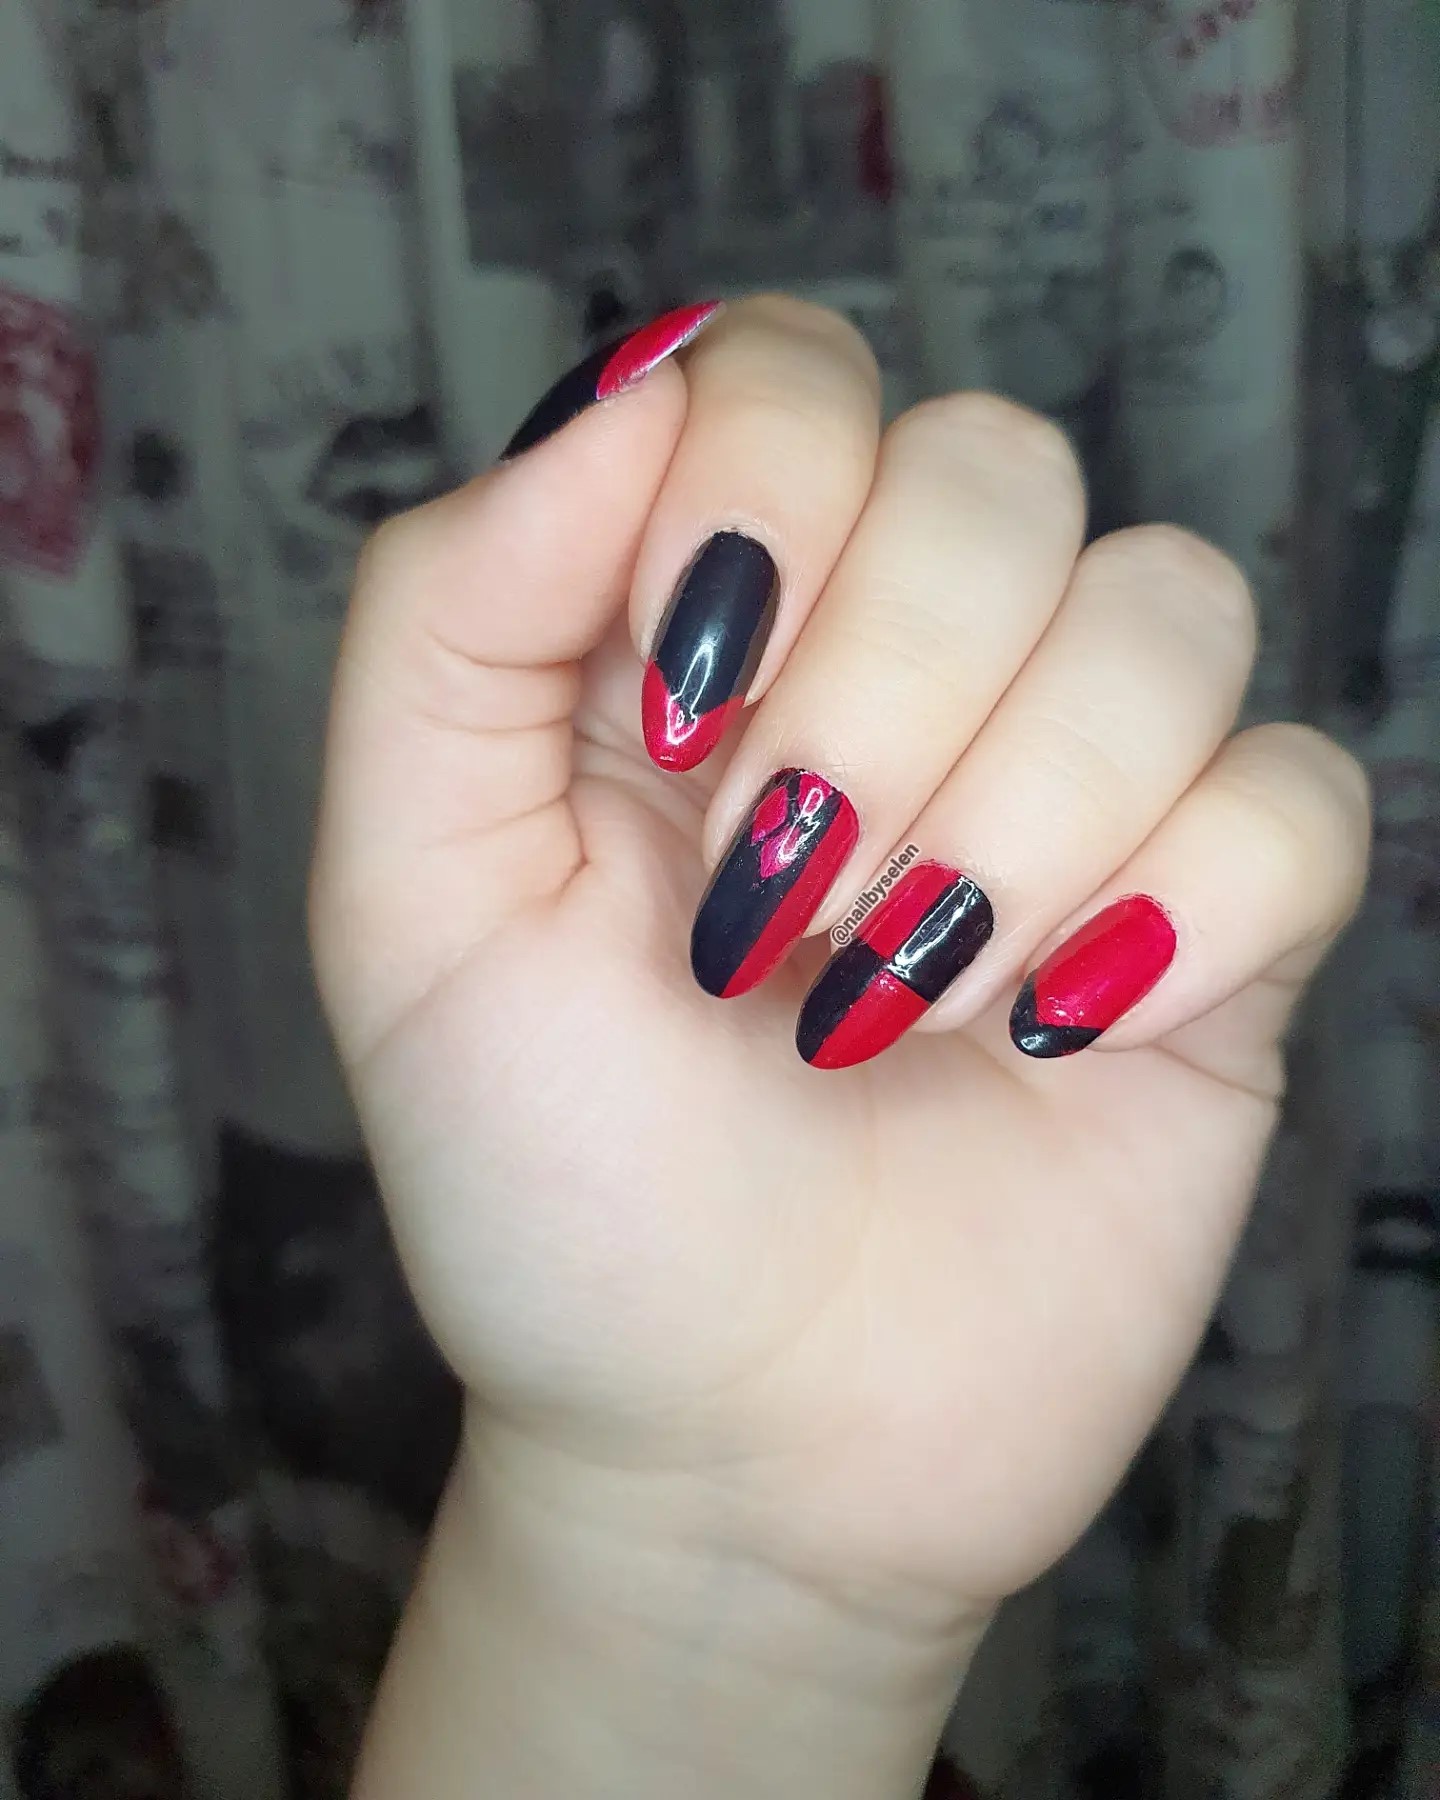 Geometric shapes always look amazing since you can be as creative as you want. Just like in this example above, each nail has a different geometric shape with black and red nail polish. Go for it if you don't like simple nails.